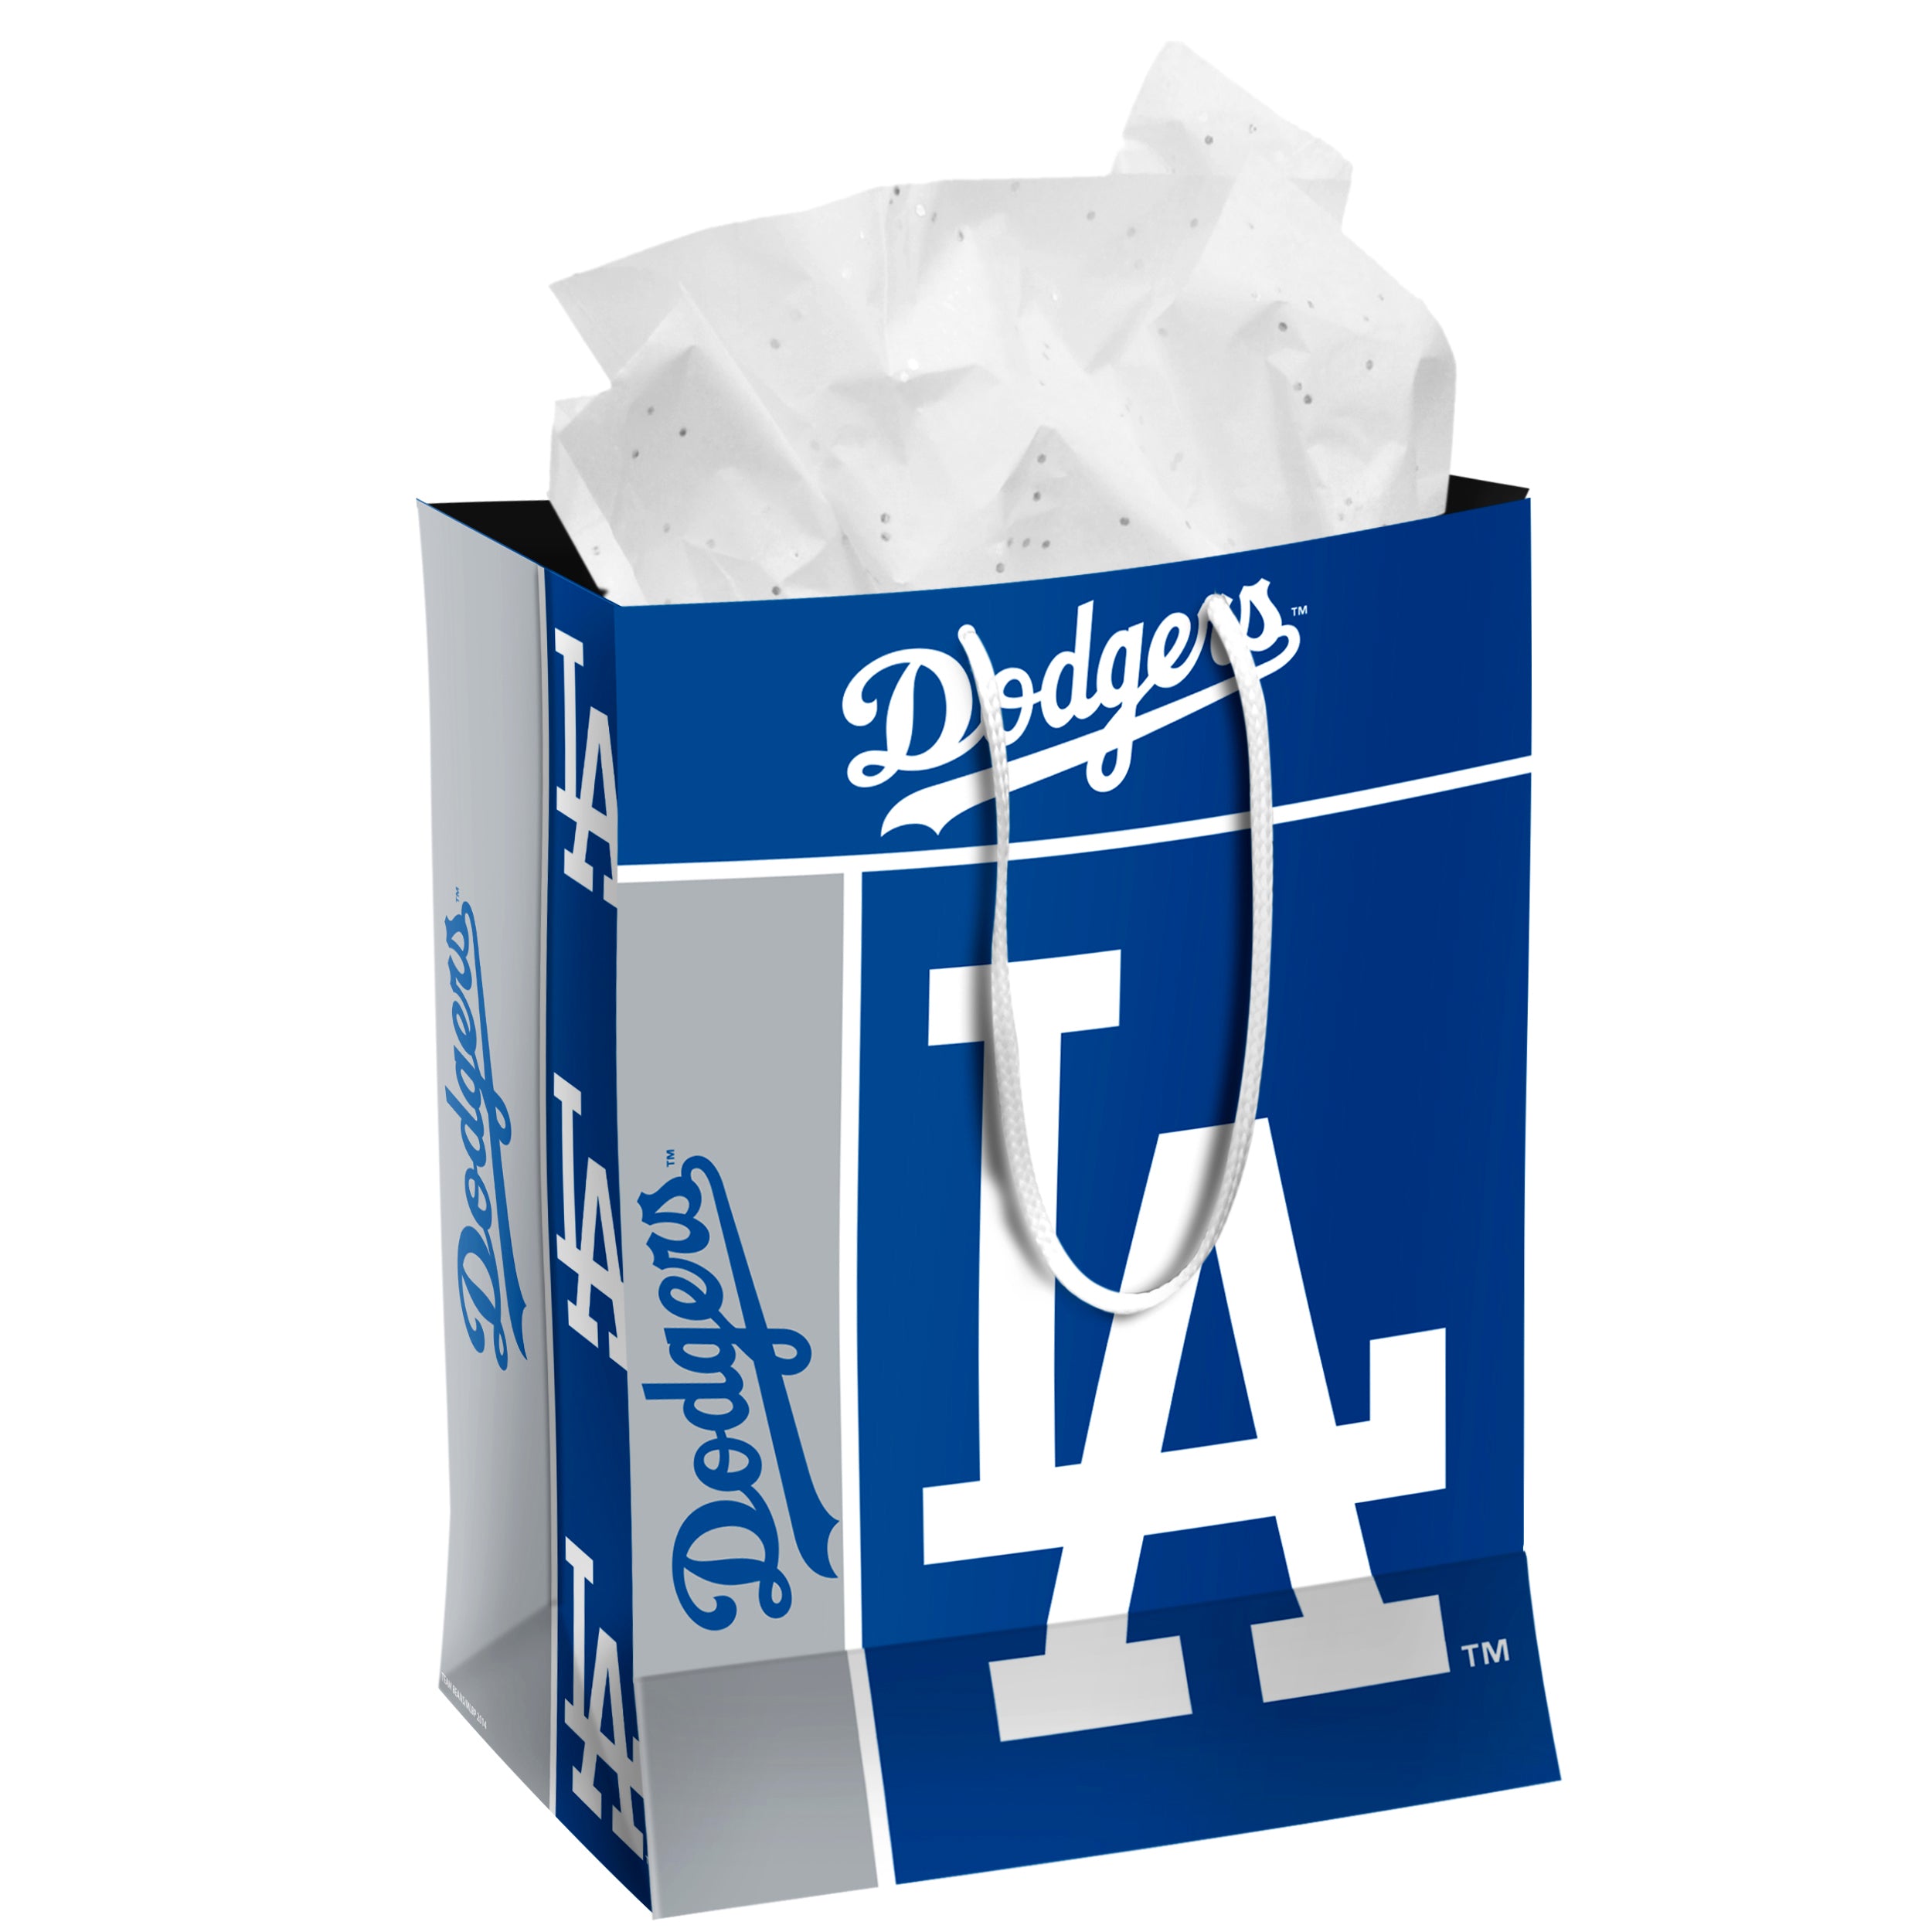 Los Angeles Dodgers on X: Need a last minute #FathersDay gift